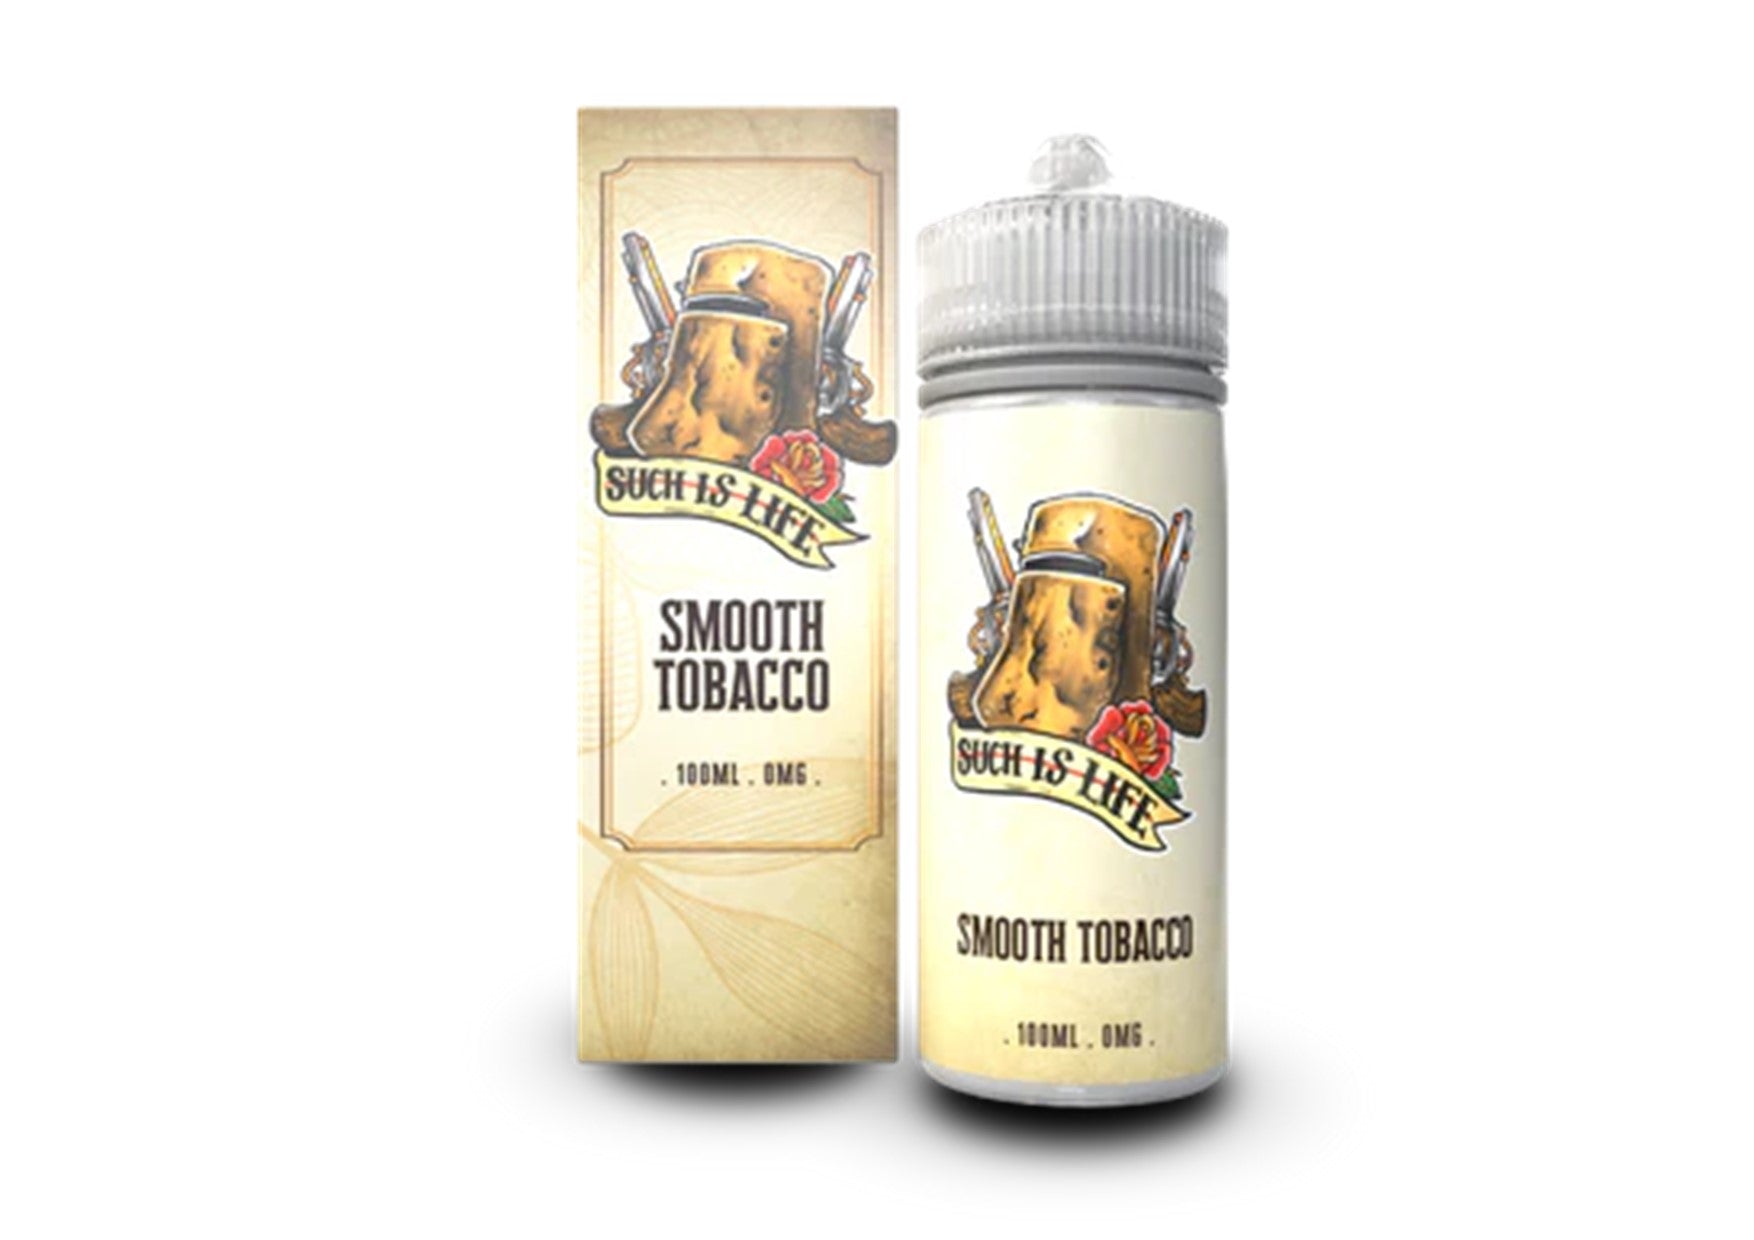 Such is Life | Smooth Tobacco